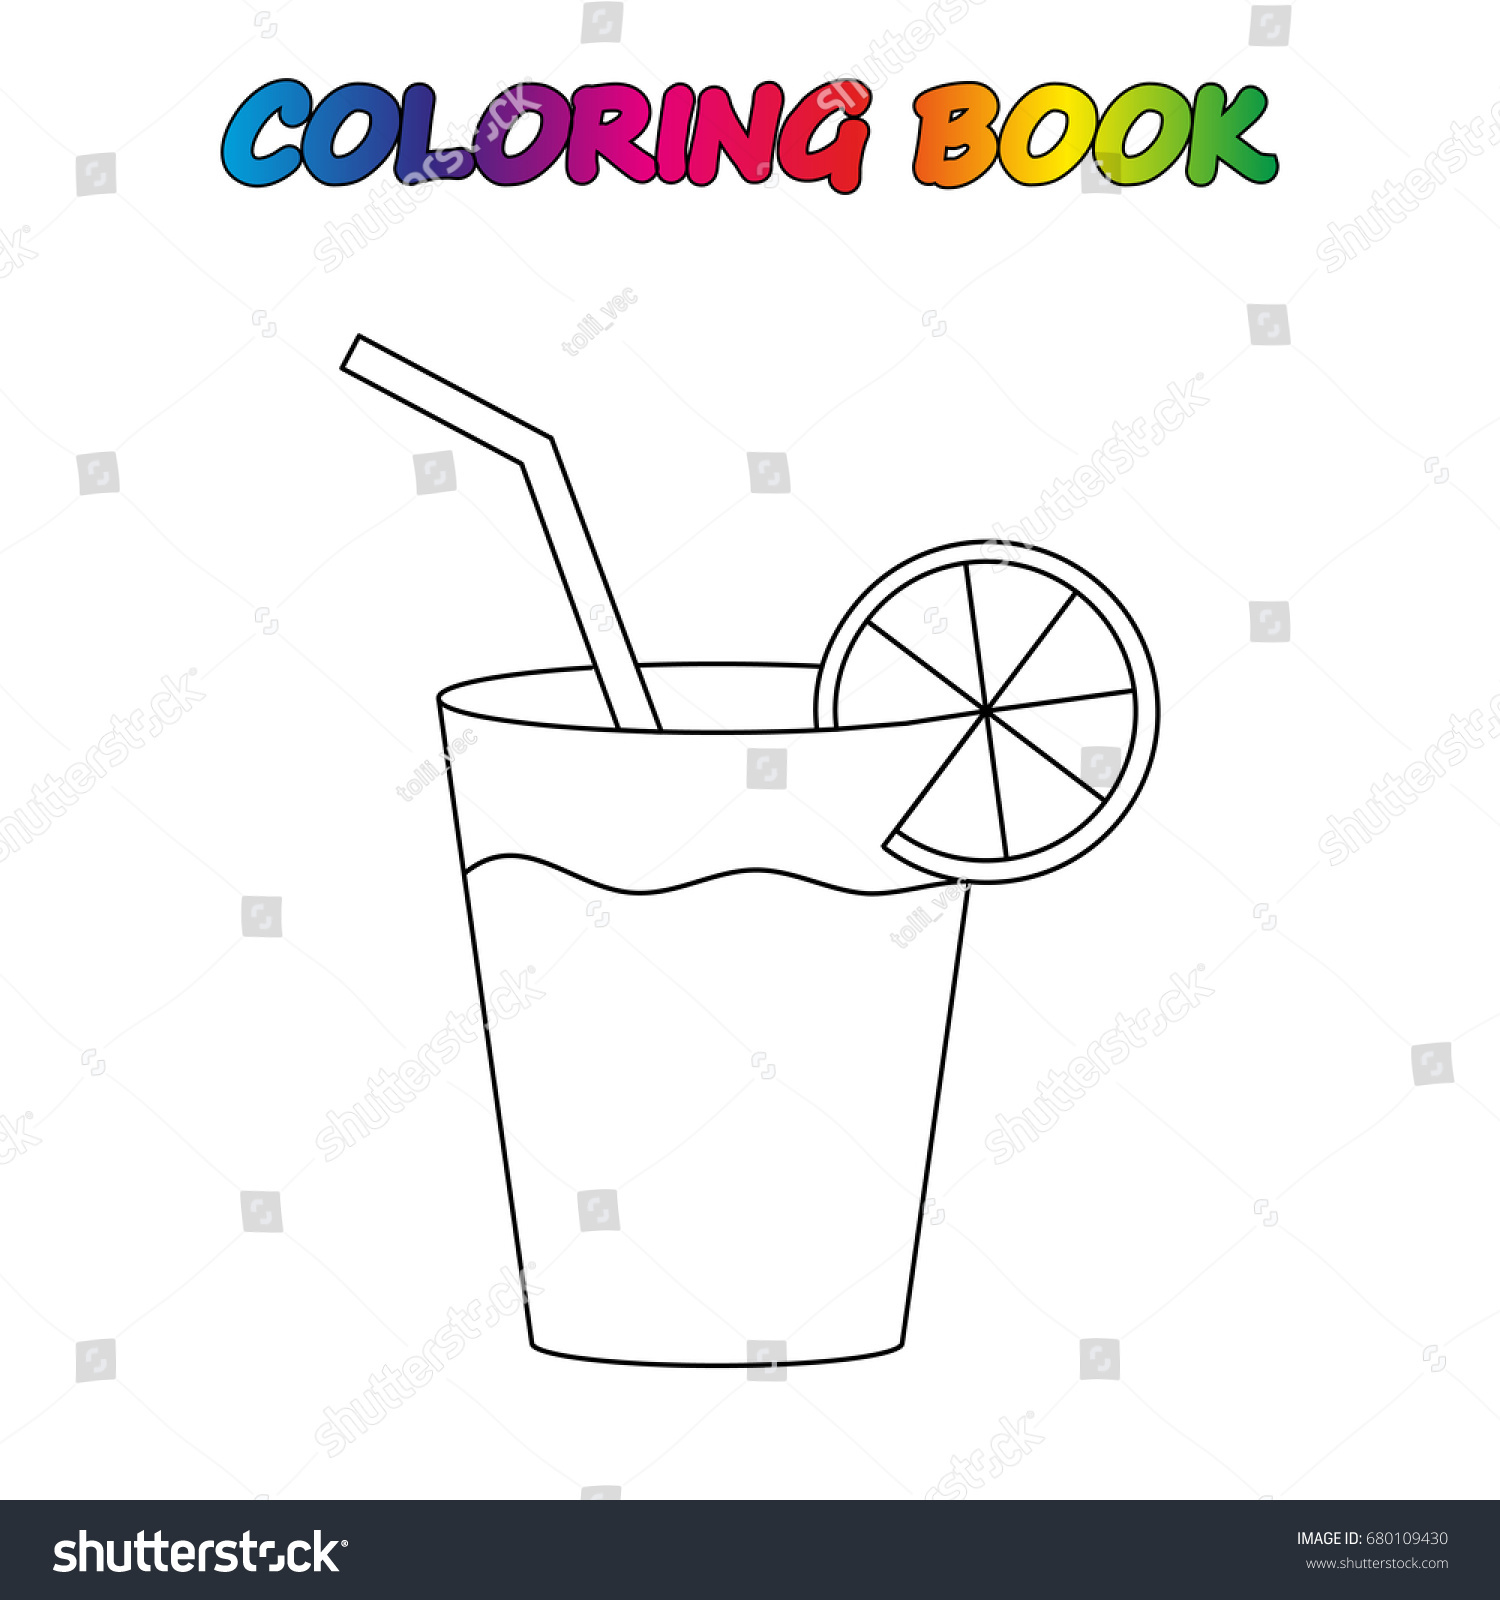 Glass juice coloring book coloring page stock vector royalty free